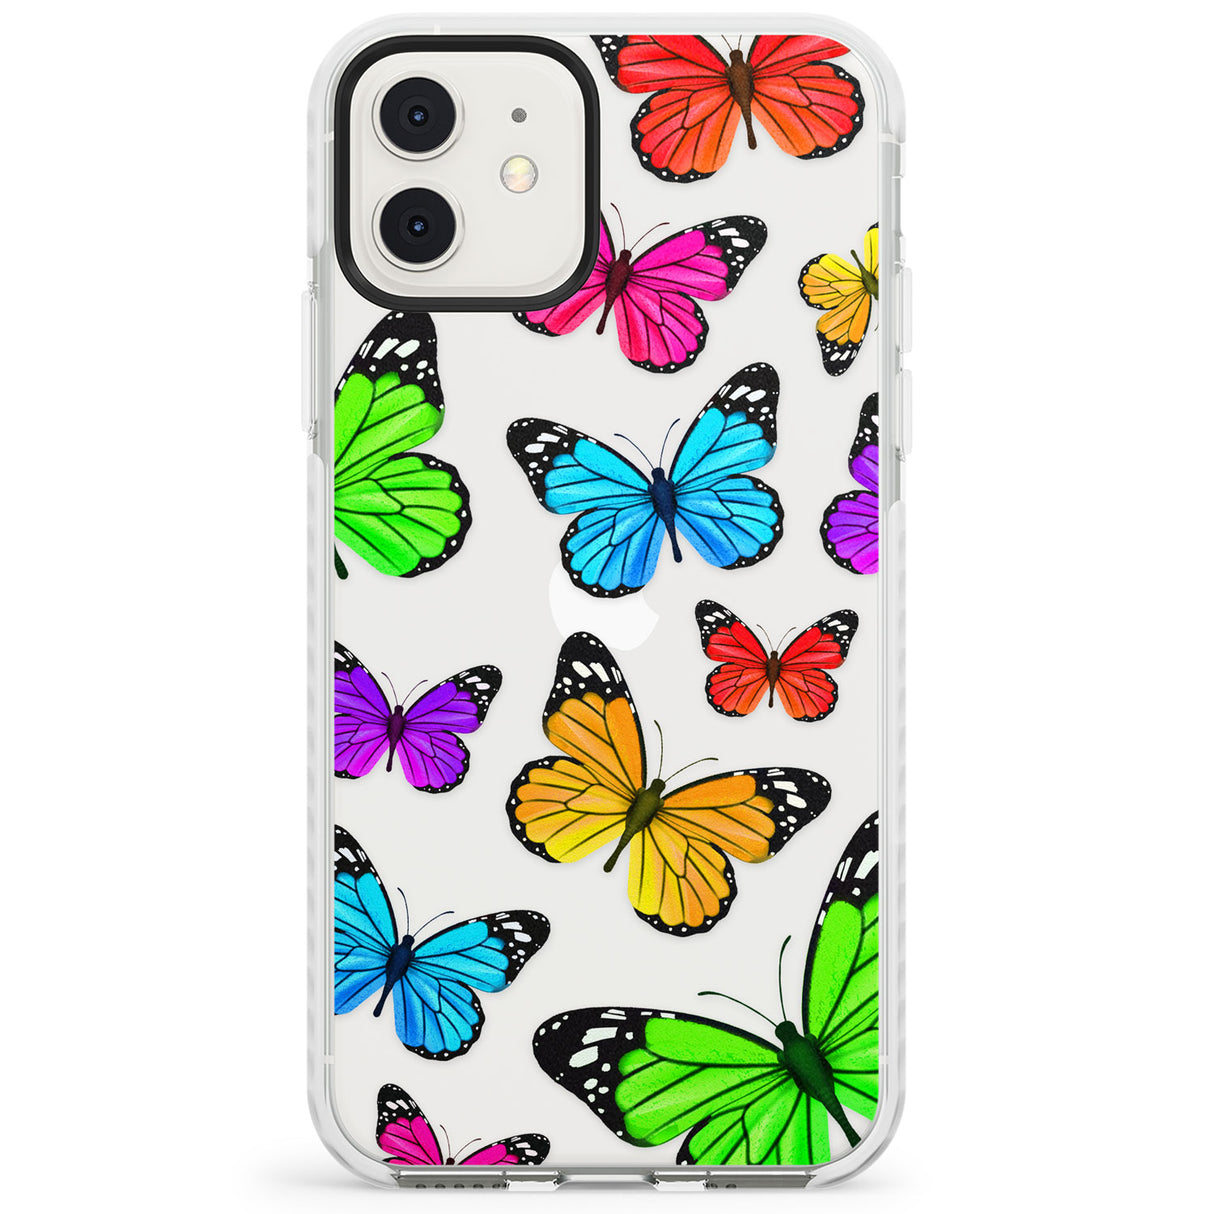 Vibrant Butterflies Impact Phone Case for iPhone 11, iphone 12